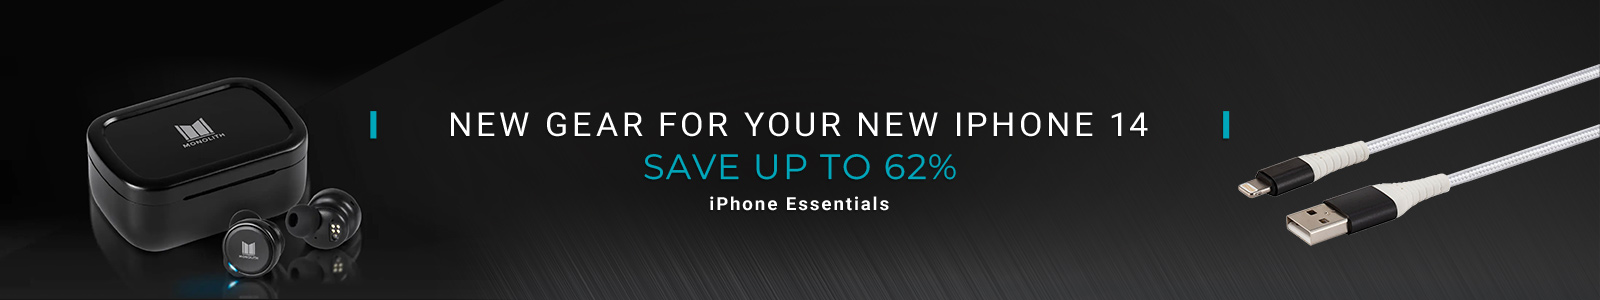 New Gear for Your New iPhone 14
Save up to 62%
iPhone Essentials
Shop Now